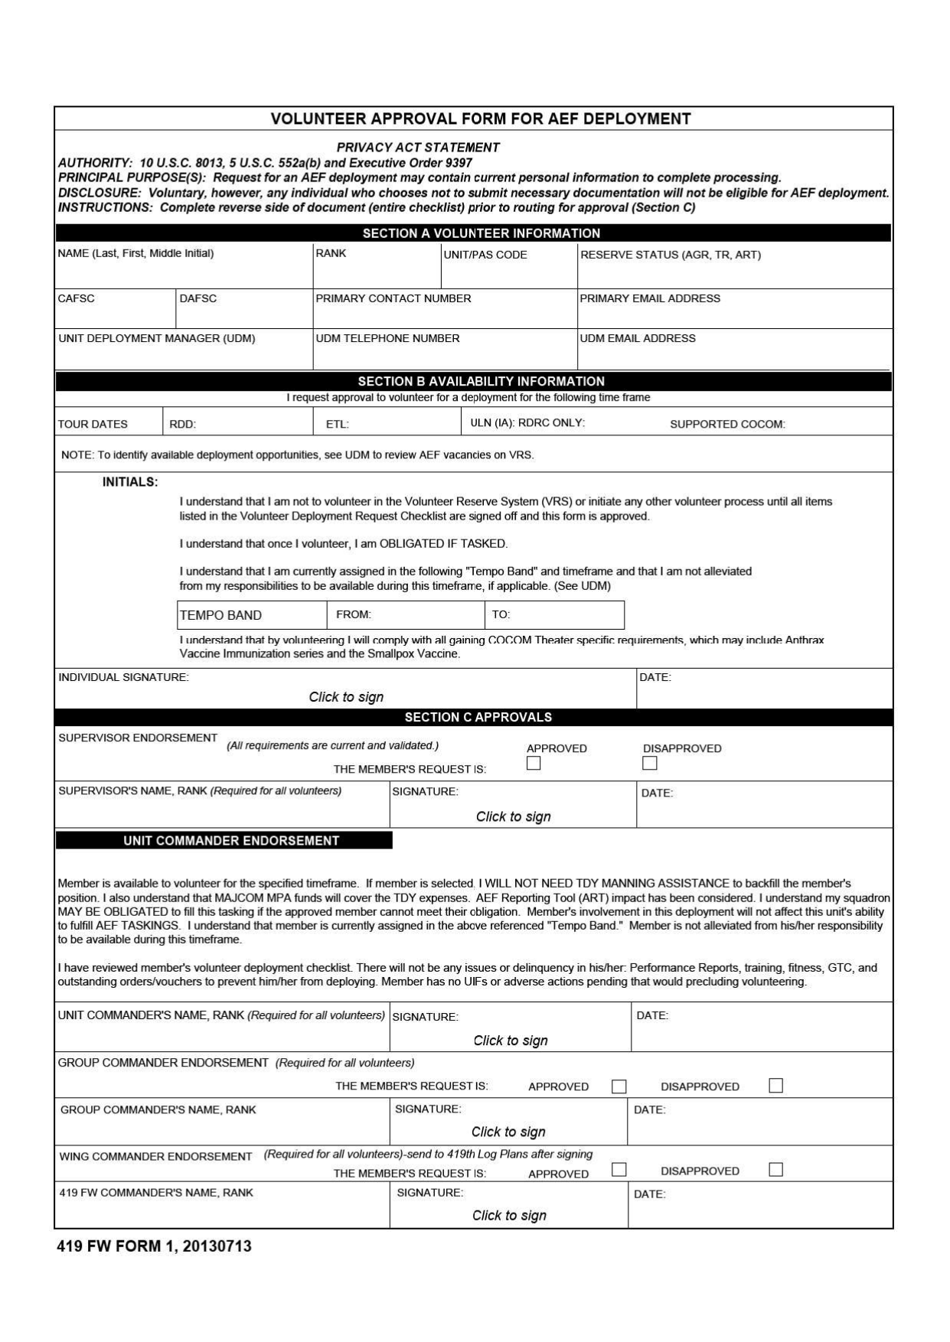 419 FW Form 1 Volunteer Approval Form for Aef Deployment, Page 1